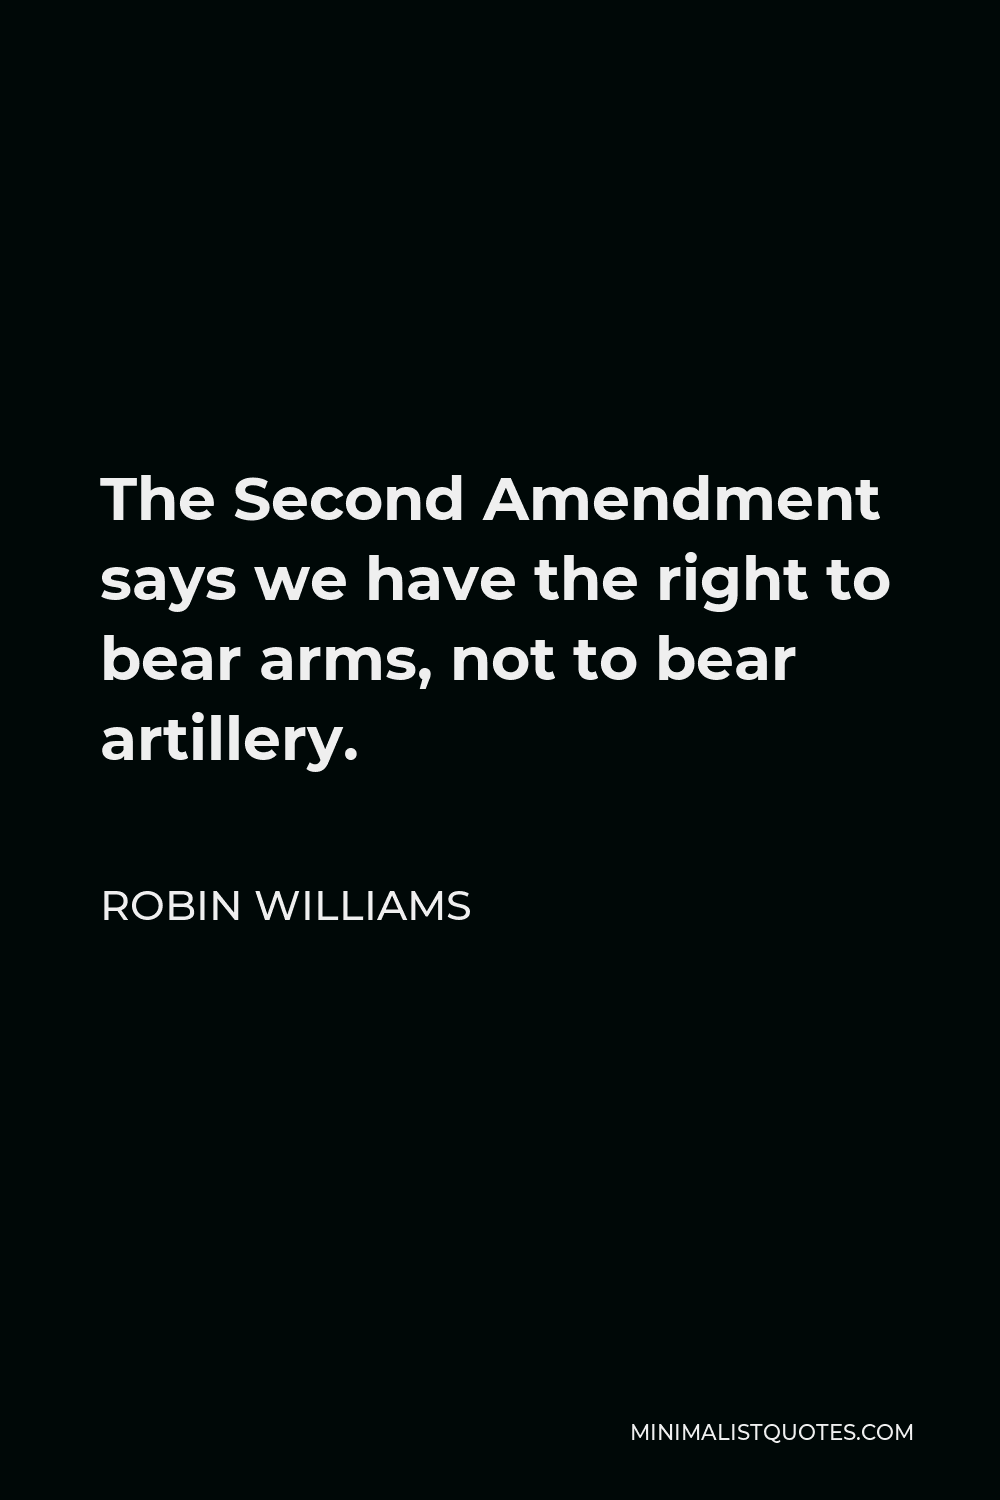 Robin Williams Quote - The Second Amendment says we have the right to bear arms, not to bear artillery.